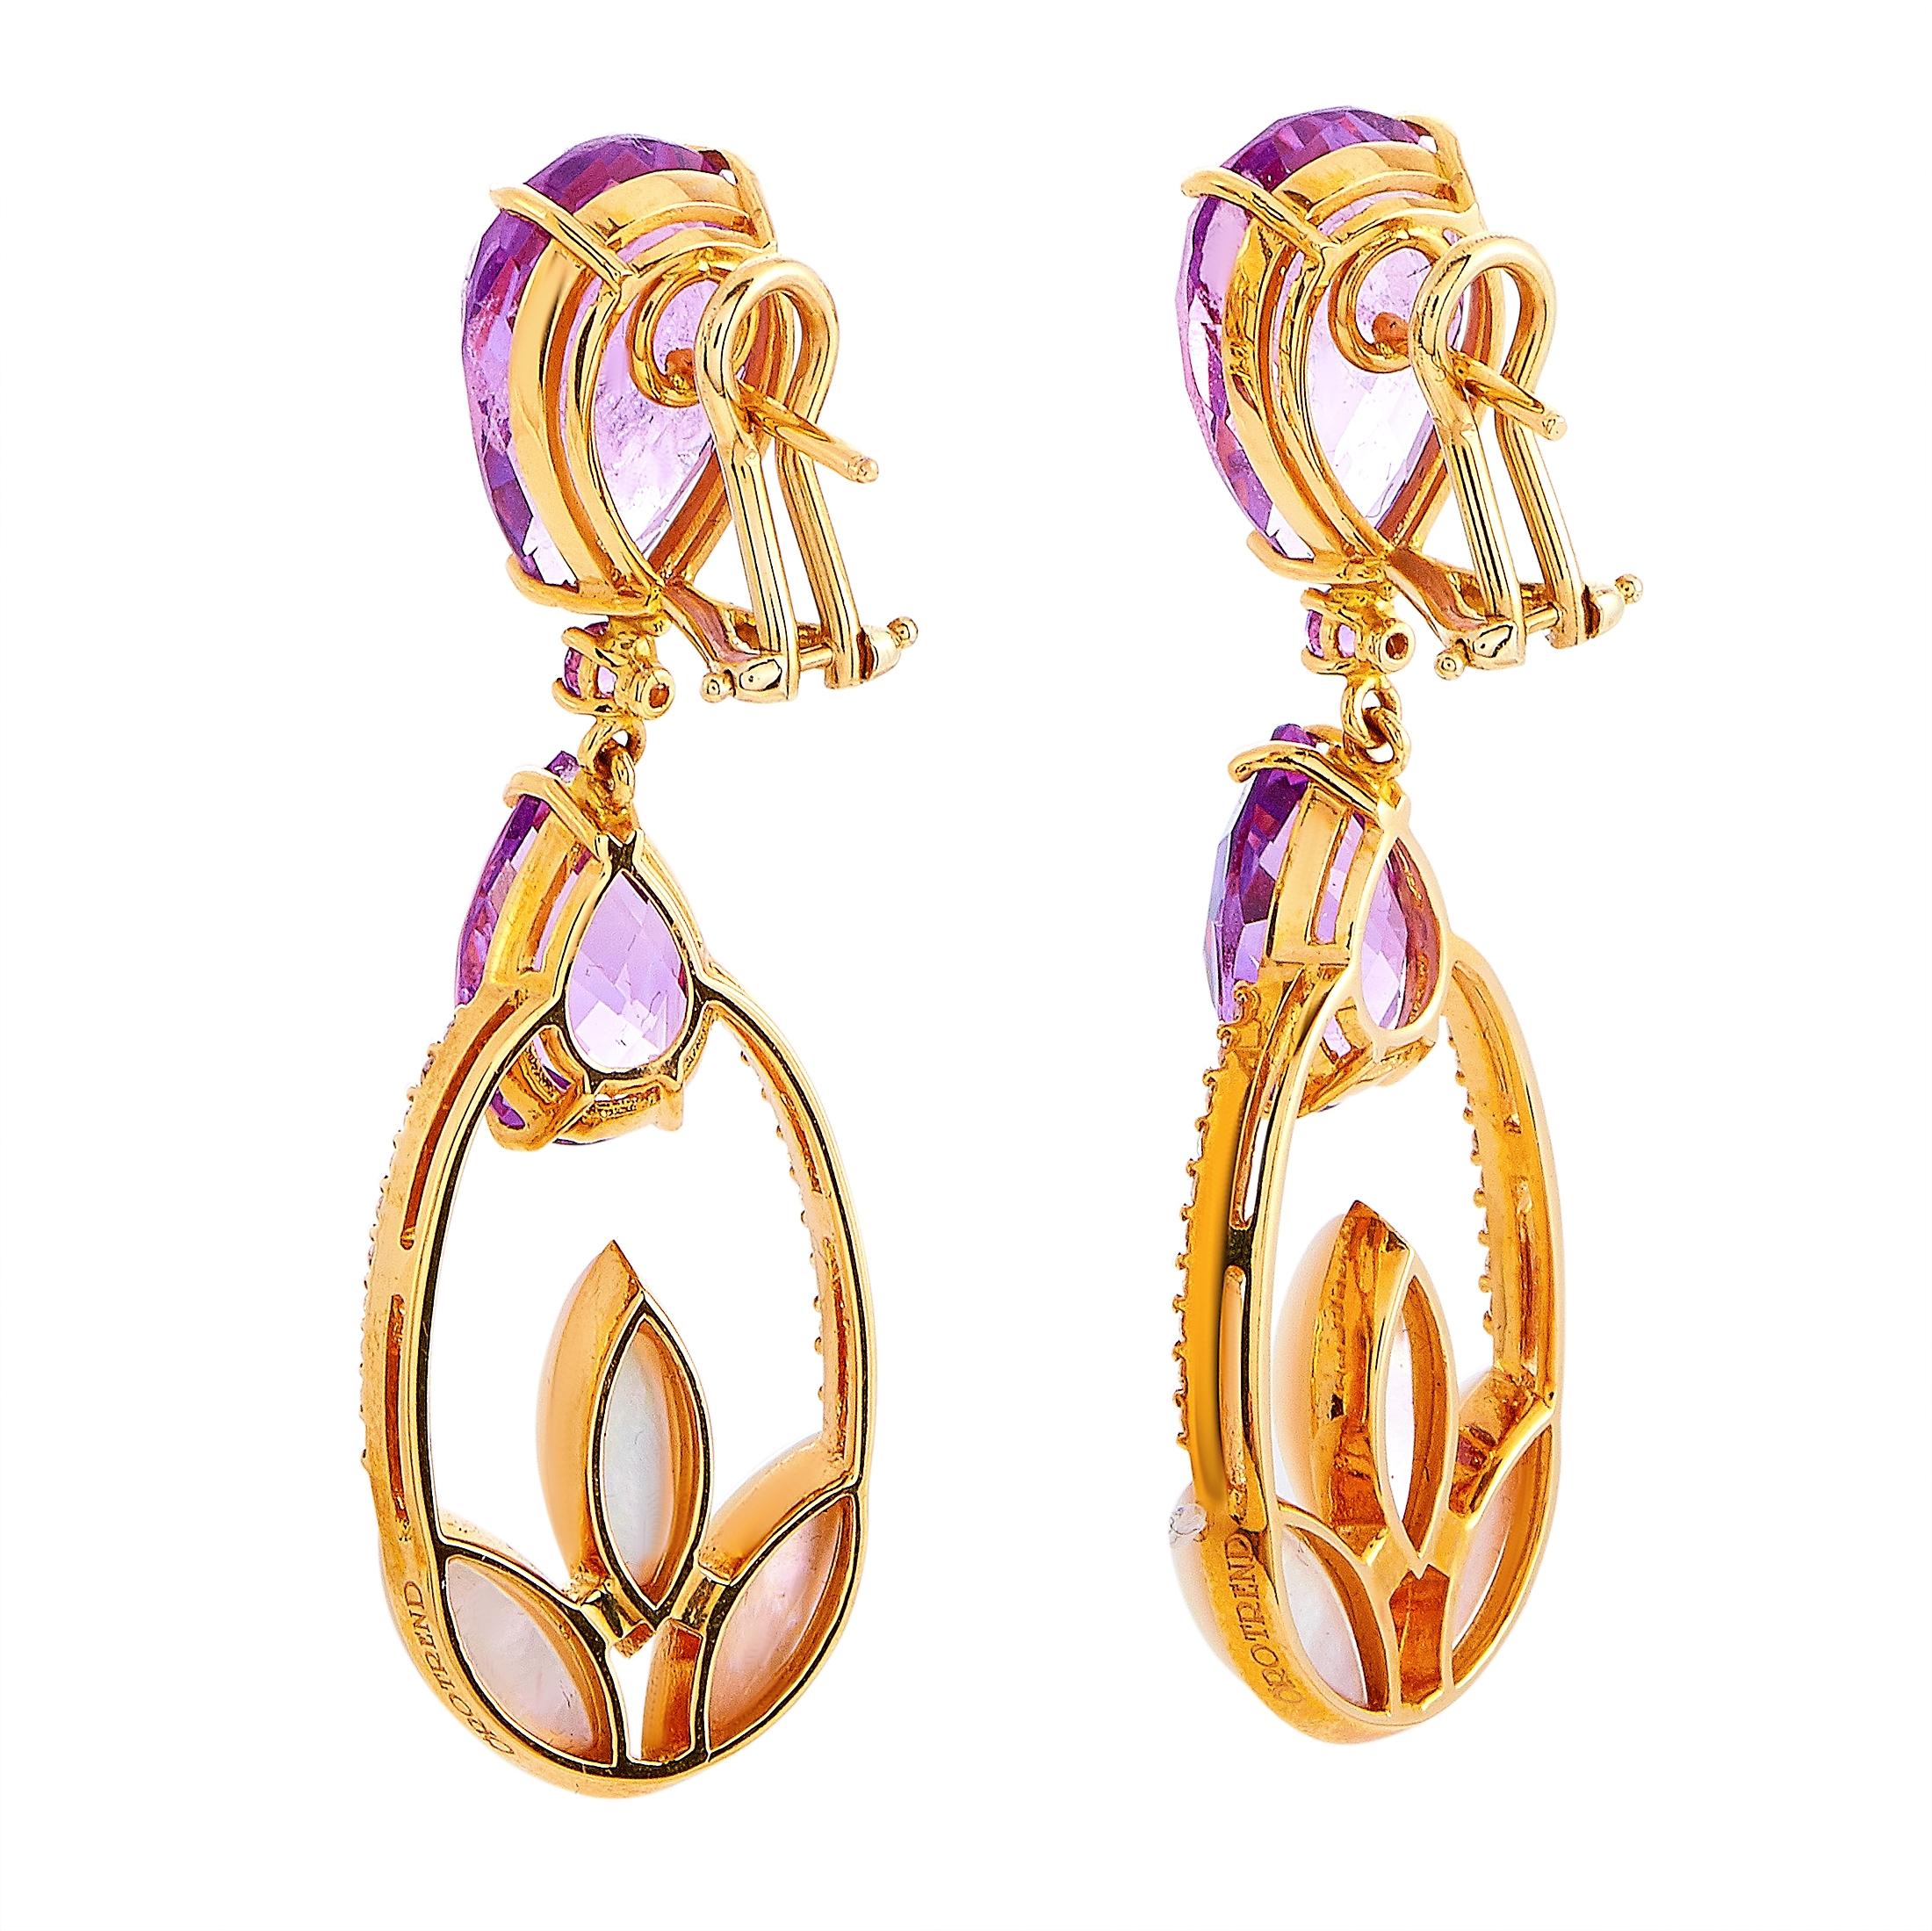 These Oro Trend earrings are crafted from 18K rose gold and each of the two weighs 7.5 grams, measuring 2” in length and 0.65” in width. The earrings are embellished with mother of pearl, amethysts, and a total of 0.35 carats of diamonds.
 
 The